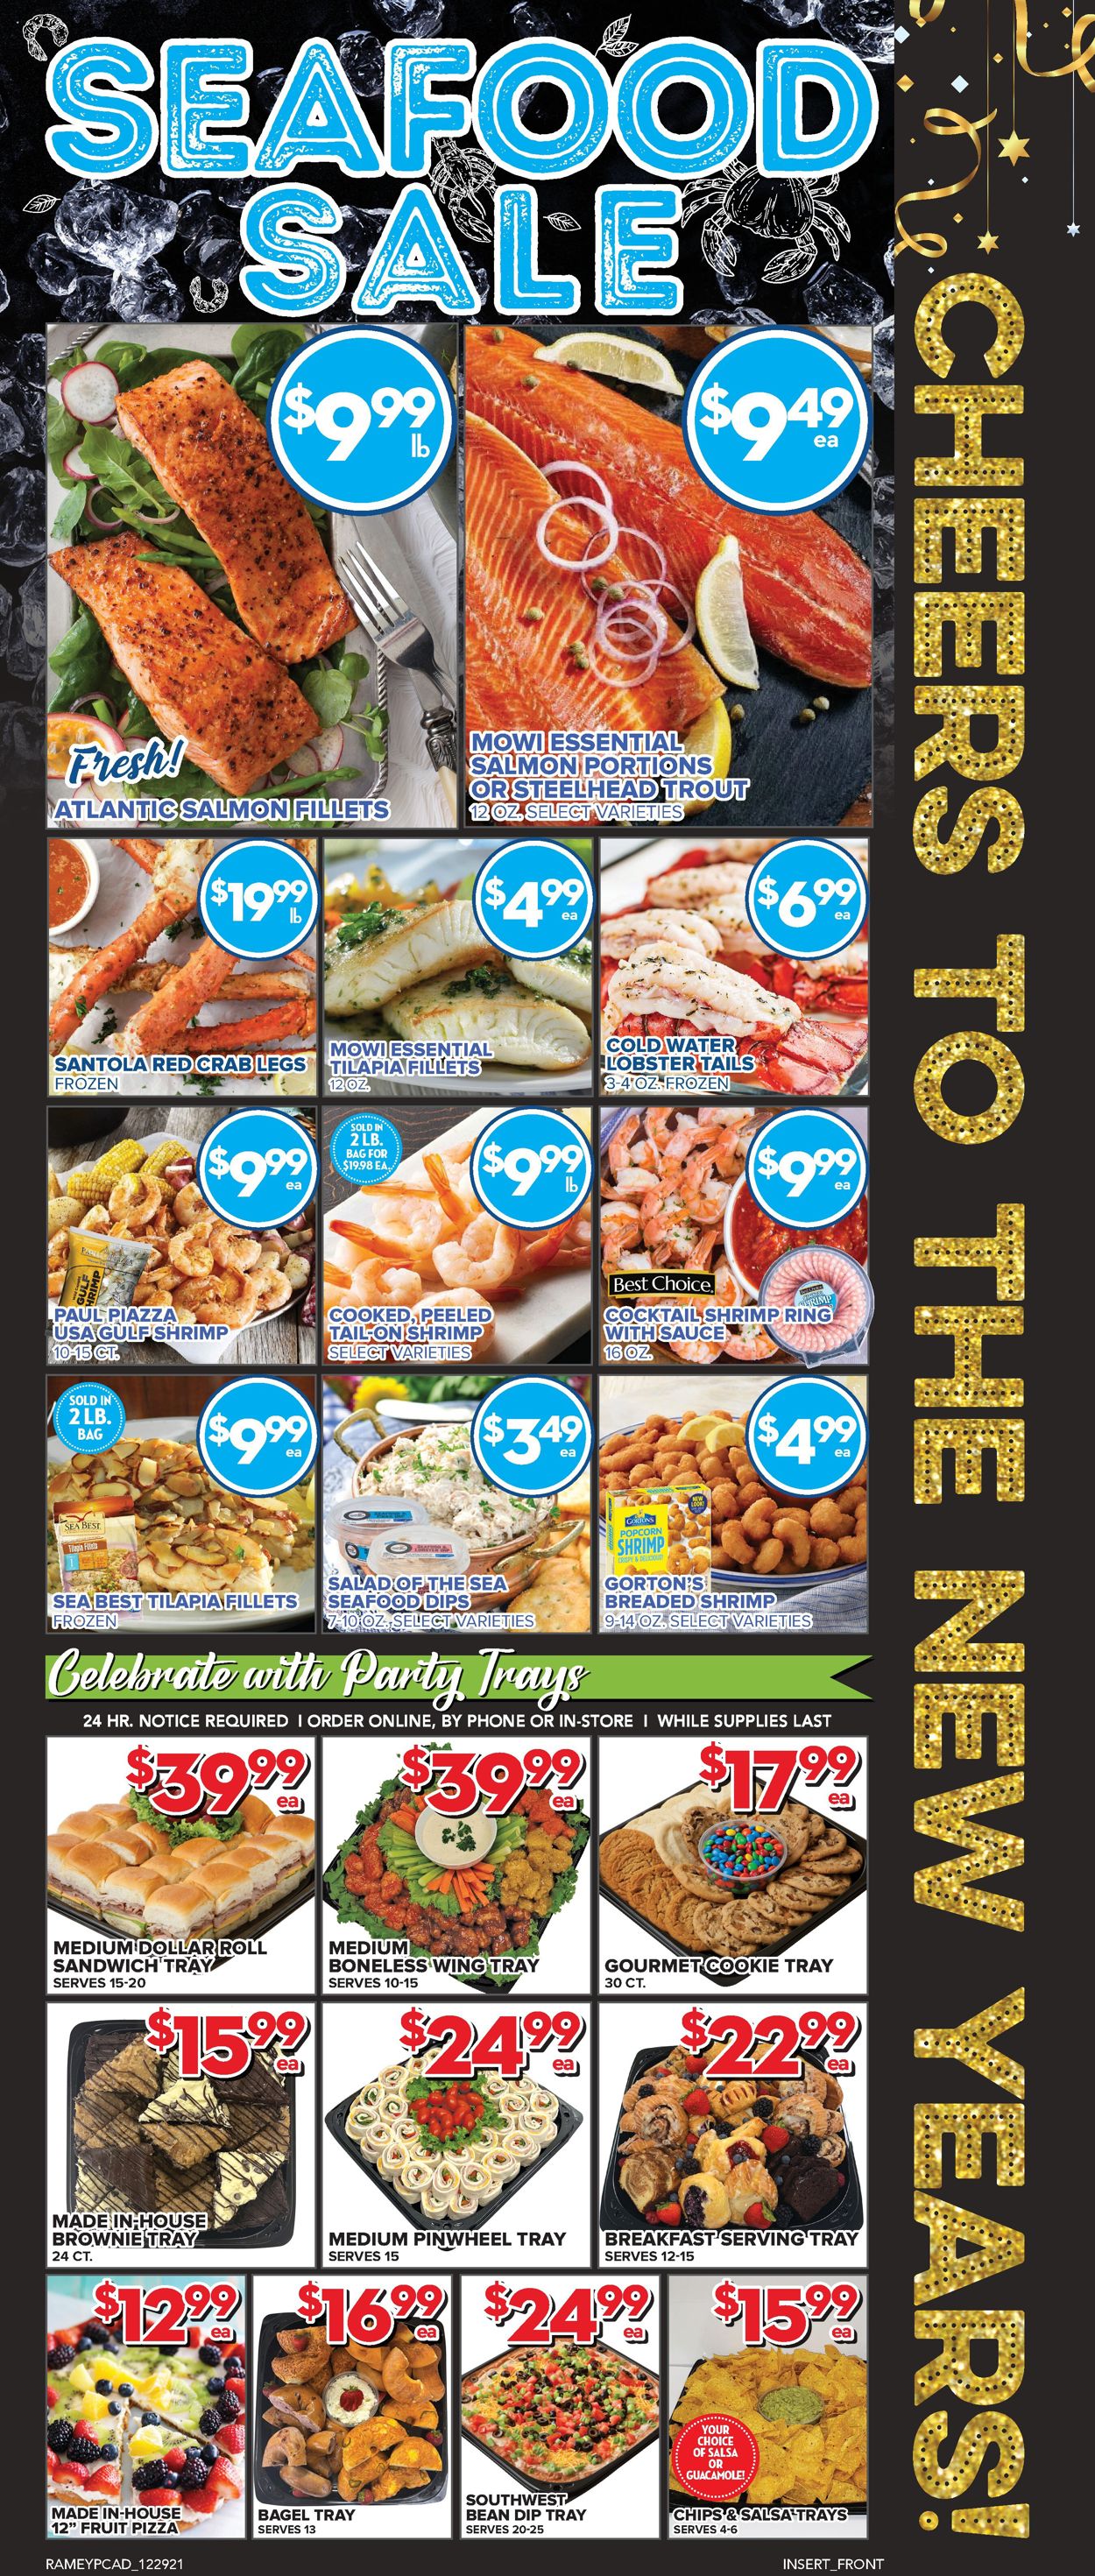 Price Cutter Weekly Ad Circular - valid 12/29-01/04/2022 (Page 5)